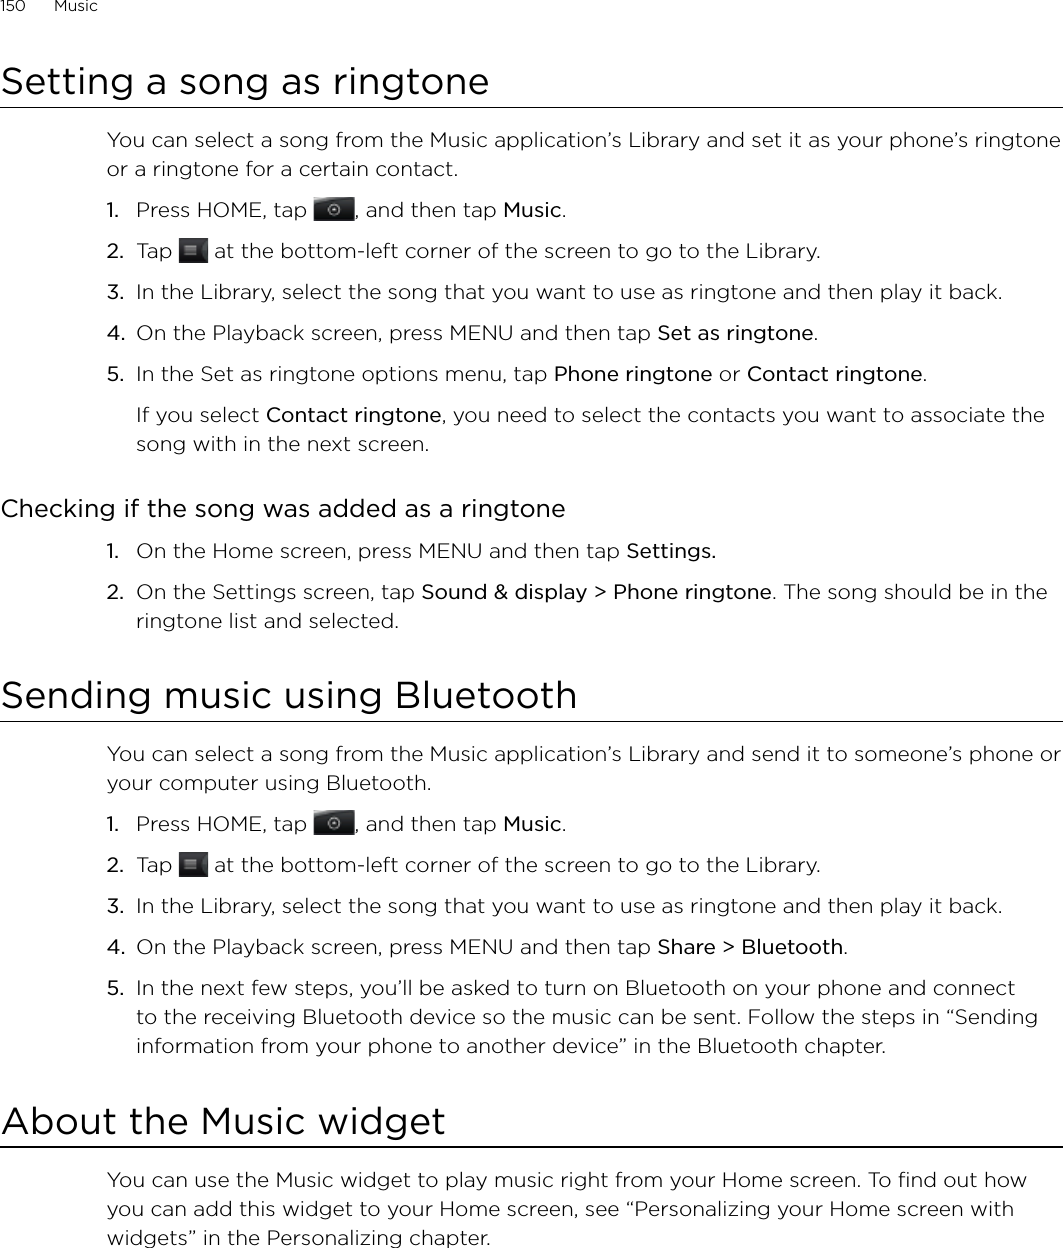 150      Music      Setting a song as ringtoneYou can select a song from the Music application’s Library and set it as your phone’s ringtone or a ringtone for a certain contact.Press HOME, tap , and then tap Music.Tap   at the bottom-left corner of the screen to go to the Library.In the Library, select the song that you want to use as ringtone and then play it back.On the Playback screen, press MENU and then tap Set as ringtone.In the Set as ringtone options menu, tap Phone ringtone or Contact ringtone.If you select Contact ringtone, you need to select the contacts you want to associate the song with in the next screen.Checking if the song was added as a ringtoneOn the Home screen, press MENU and then tap Settings.On the Settings screen, tap Sound &amp; display &gt; Phone ringtone. The song should be in the ringtone list and selected. Sending music using BluetoothYou can select a song from the Music application’s Library and send it to someone’s phone or your computer using Bluetooth.Press HOME, tap , and then tap Music.Tap   at the bottom-left corner of the screen to go to the Library.In the Library, select the song that you want to use as ringtone and then play it back.On the Playback screen, press MENU and then tap Share &gt; Bluetooth.In the next few steps, you’ll be asked to turn on Bluetooth on your phone and connect to the receiving Bluetooth device so the music can be sent. Follow the steps in “Sending information from your phone to another device” in the Bluetooth chapter.About the Music widgetYou can use the Music widget to play music right from your Home screen. To find out how you can add this widget to your Home screen, see “Personalizing your Home screen with widgets” in the Personalizing chapter.1.2.3.4.5.1.2.1.2.3.4.5.